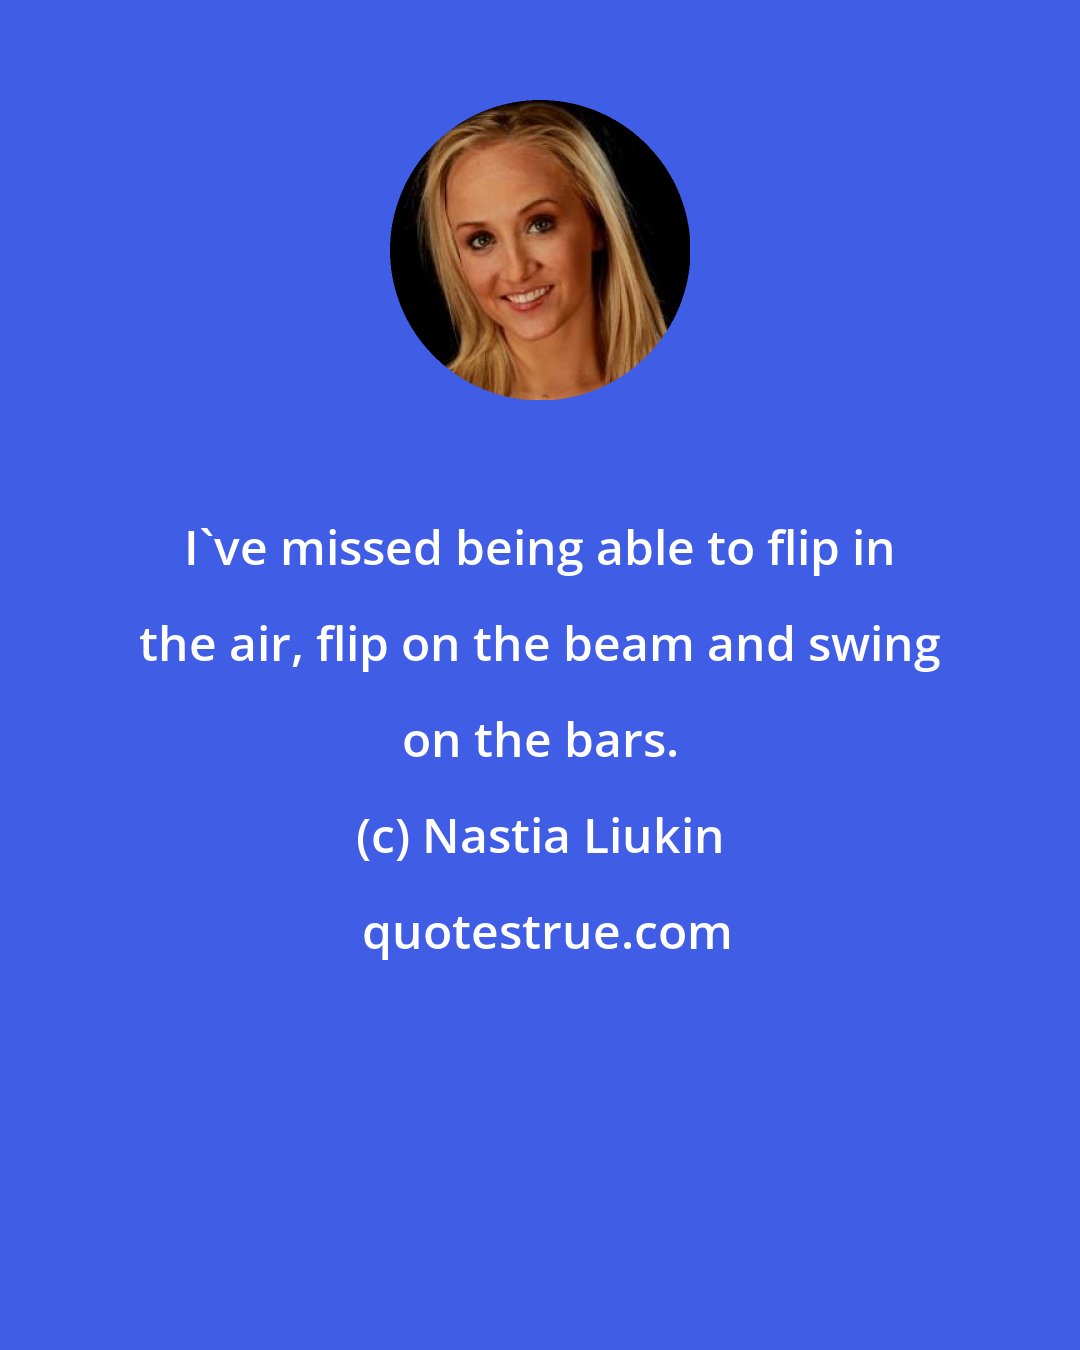 Nastia Liukin: I've missed being able to flip in the air, flip on the beam and swing on the bars.